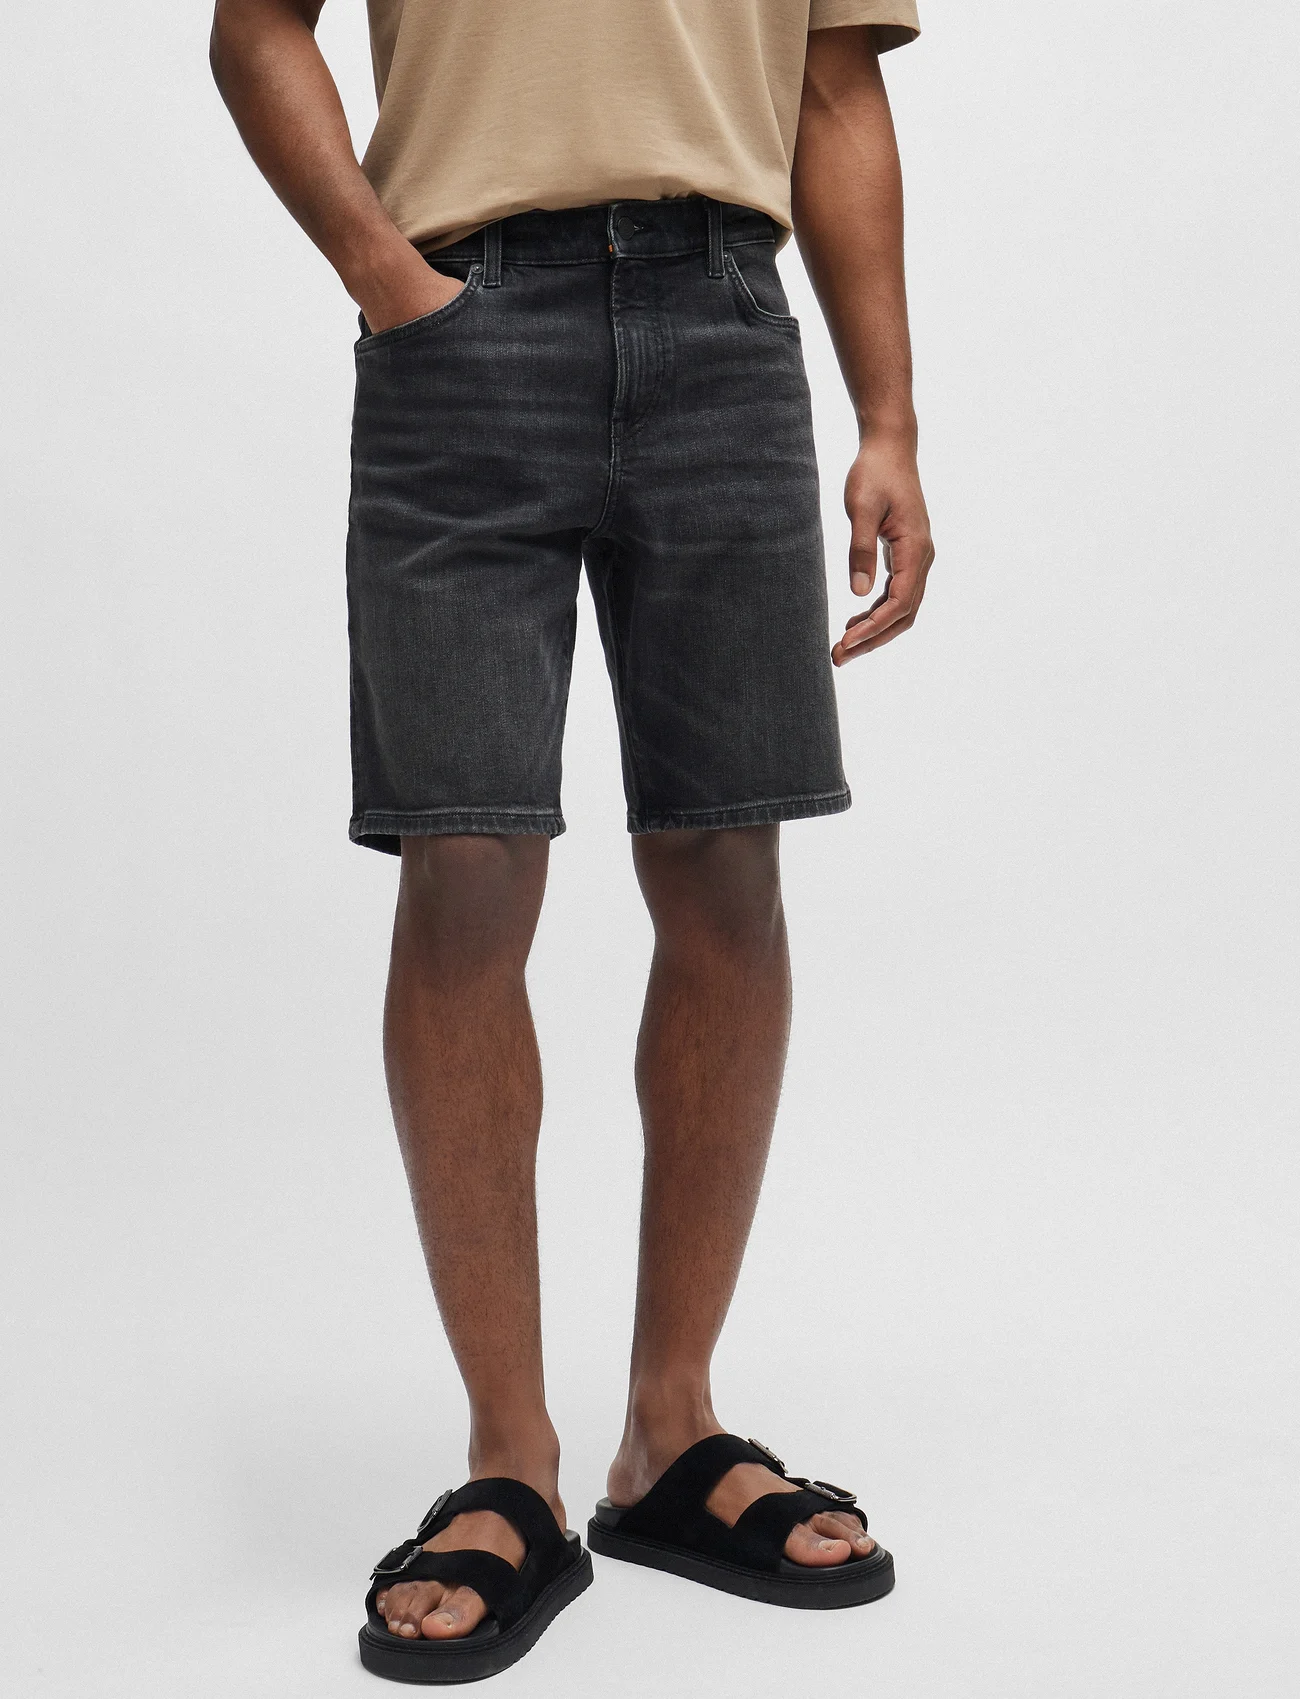 BOSS - Re.Maine-Shorts BC - jeans shorts - charcoal - 0